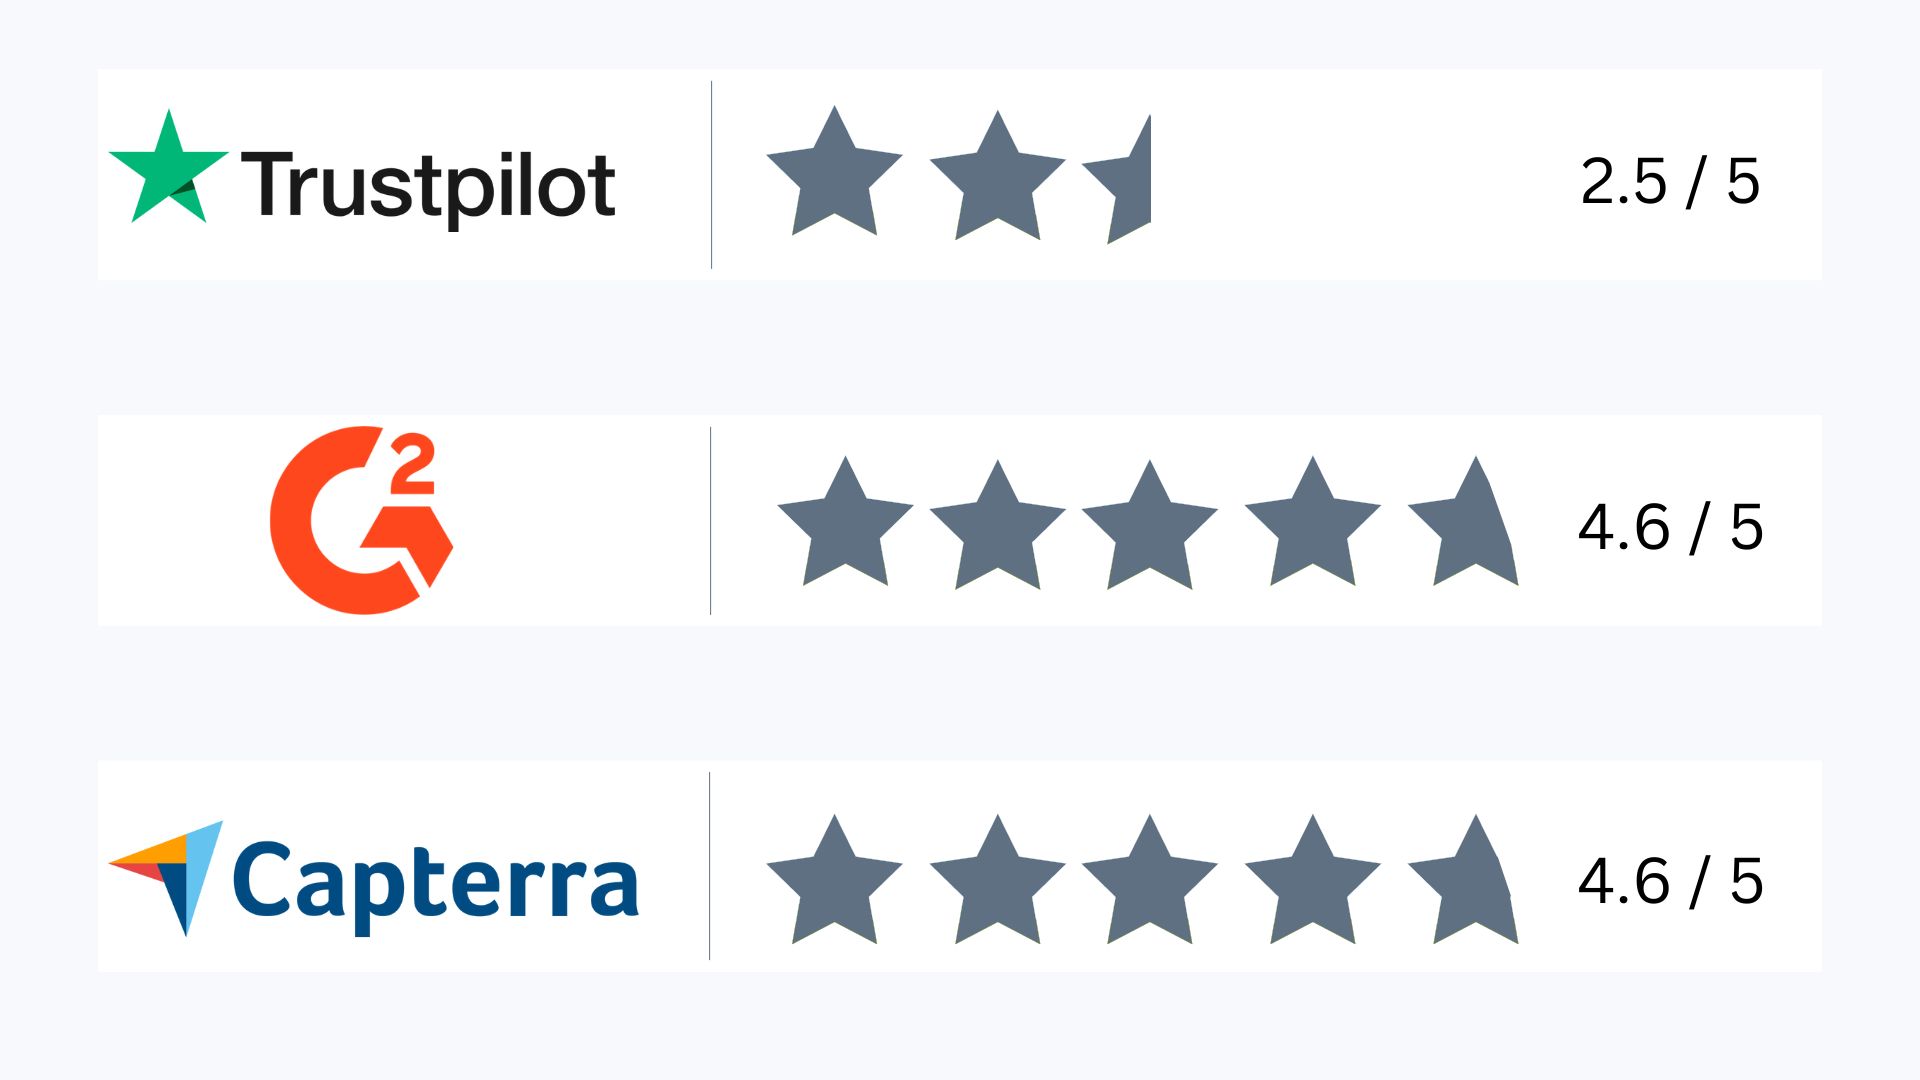 scores for different review platforms